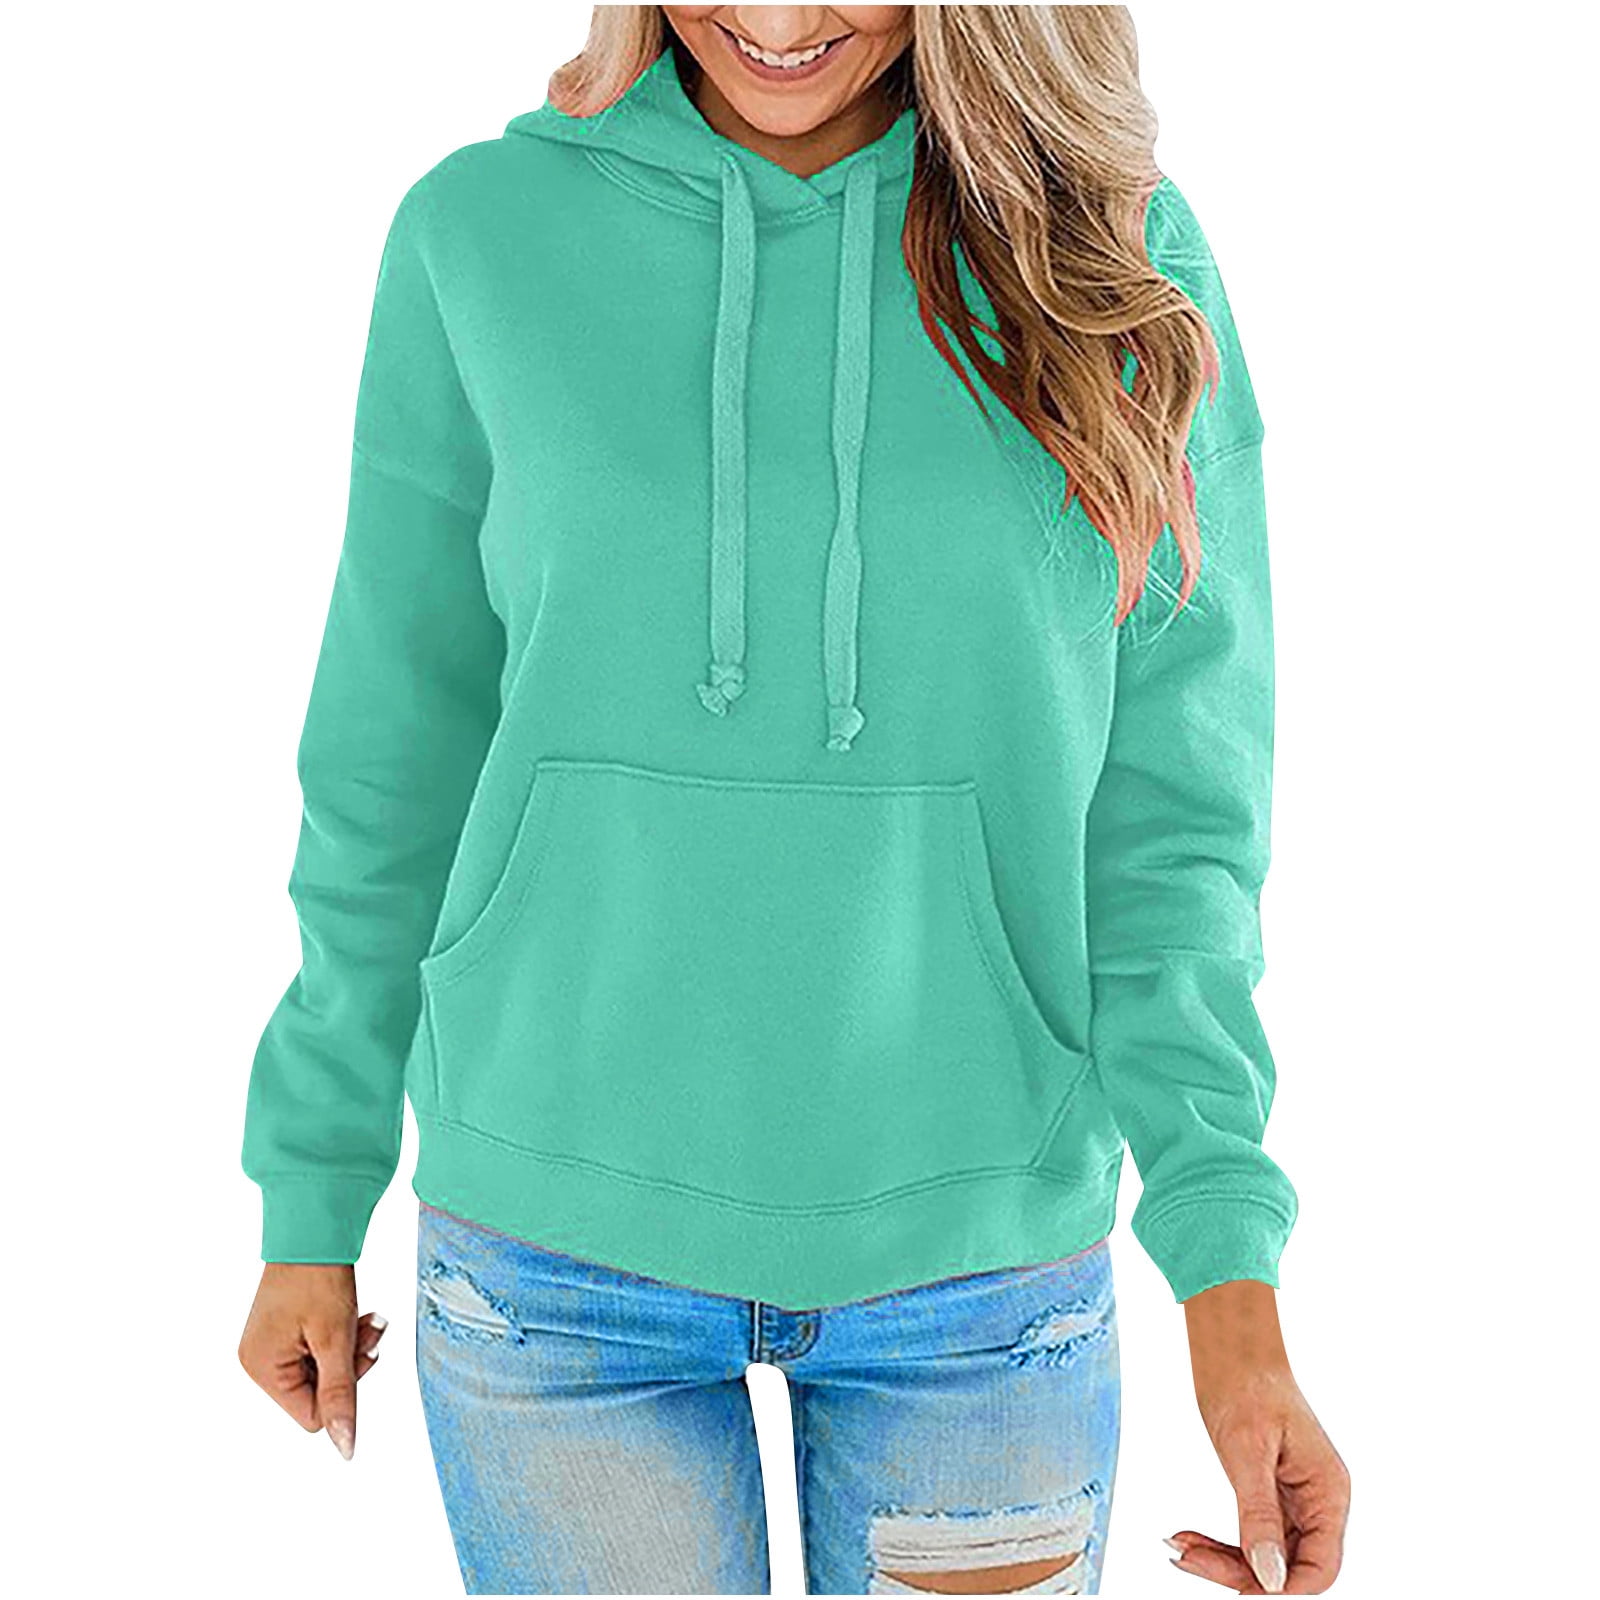 XFLWAM Womens Casual Hoodies Crew Neck Long Sleeve Sweatshirts With Pocket  Lightweight Drawstring Pullover Tops Green S